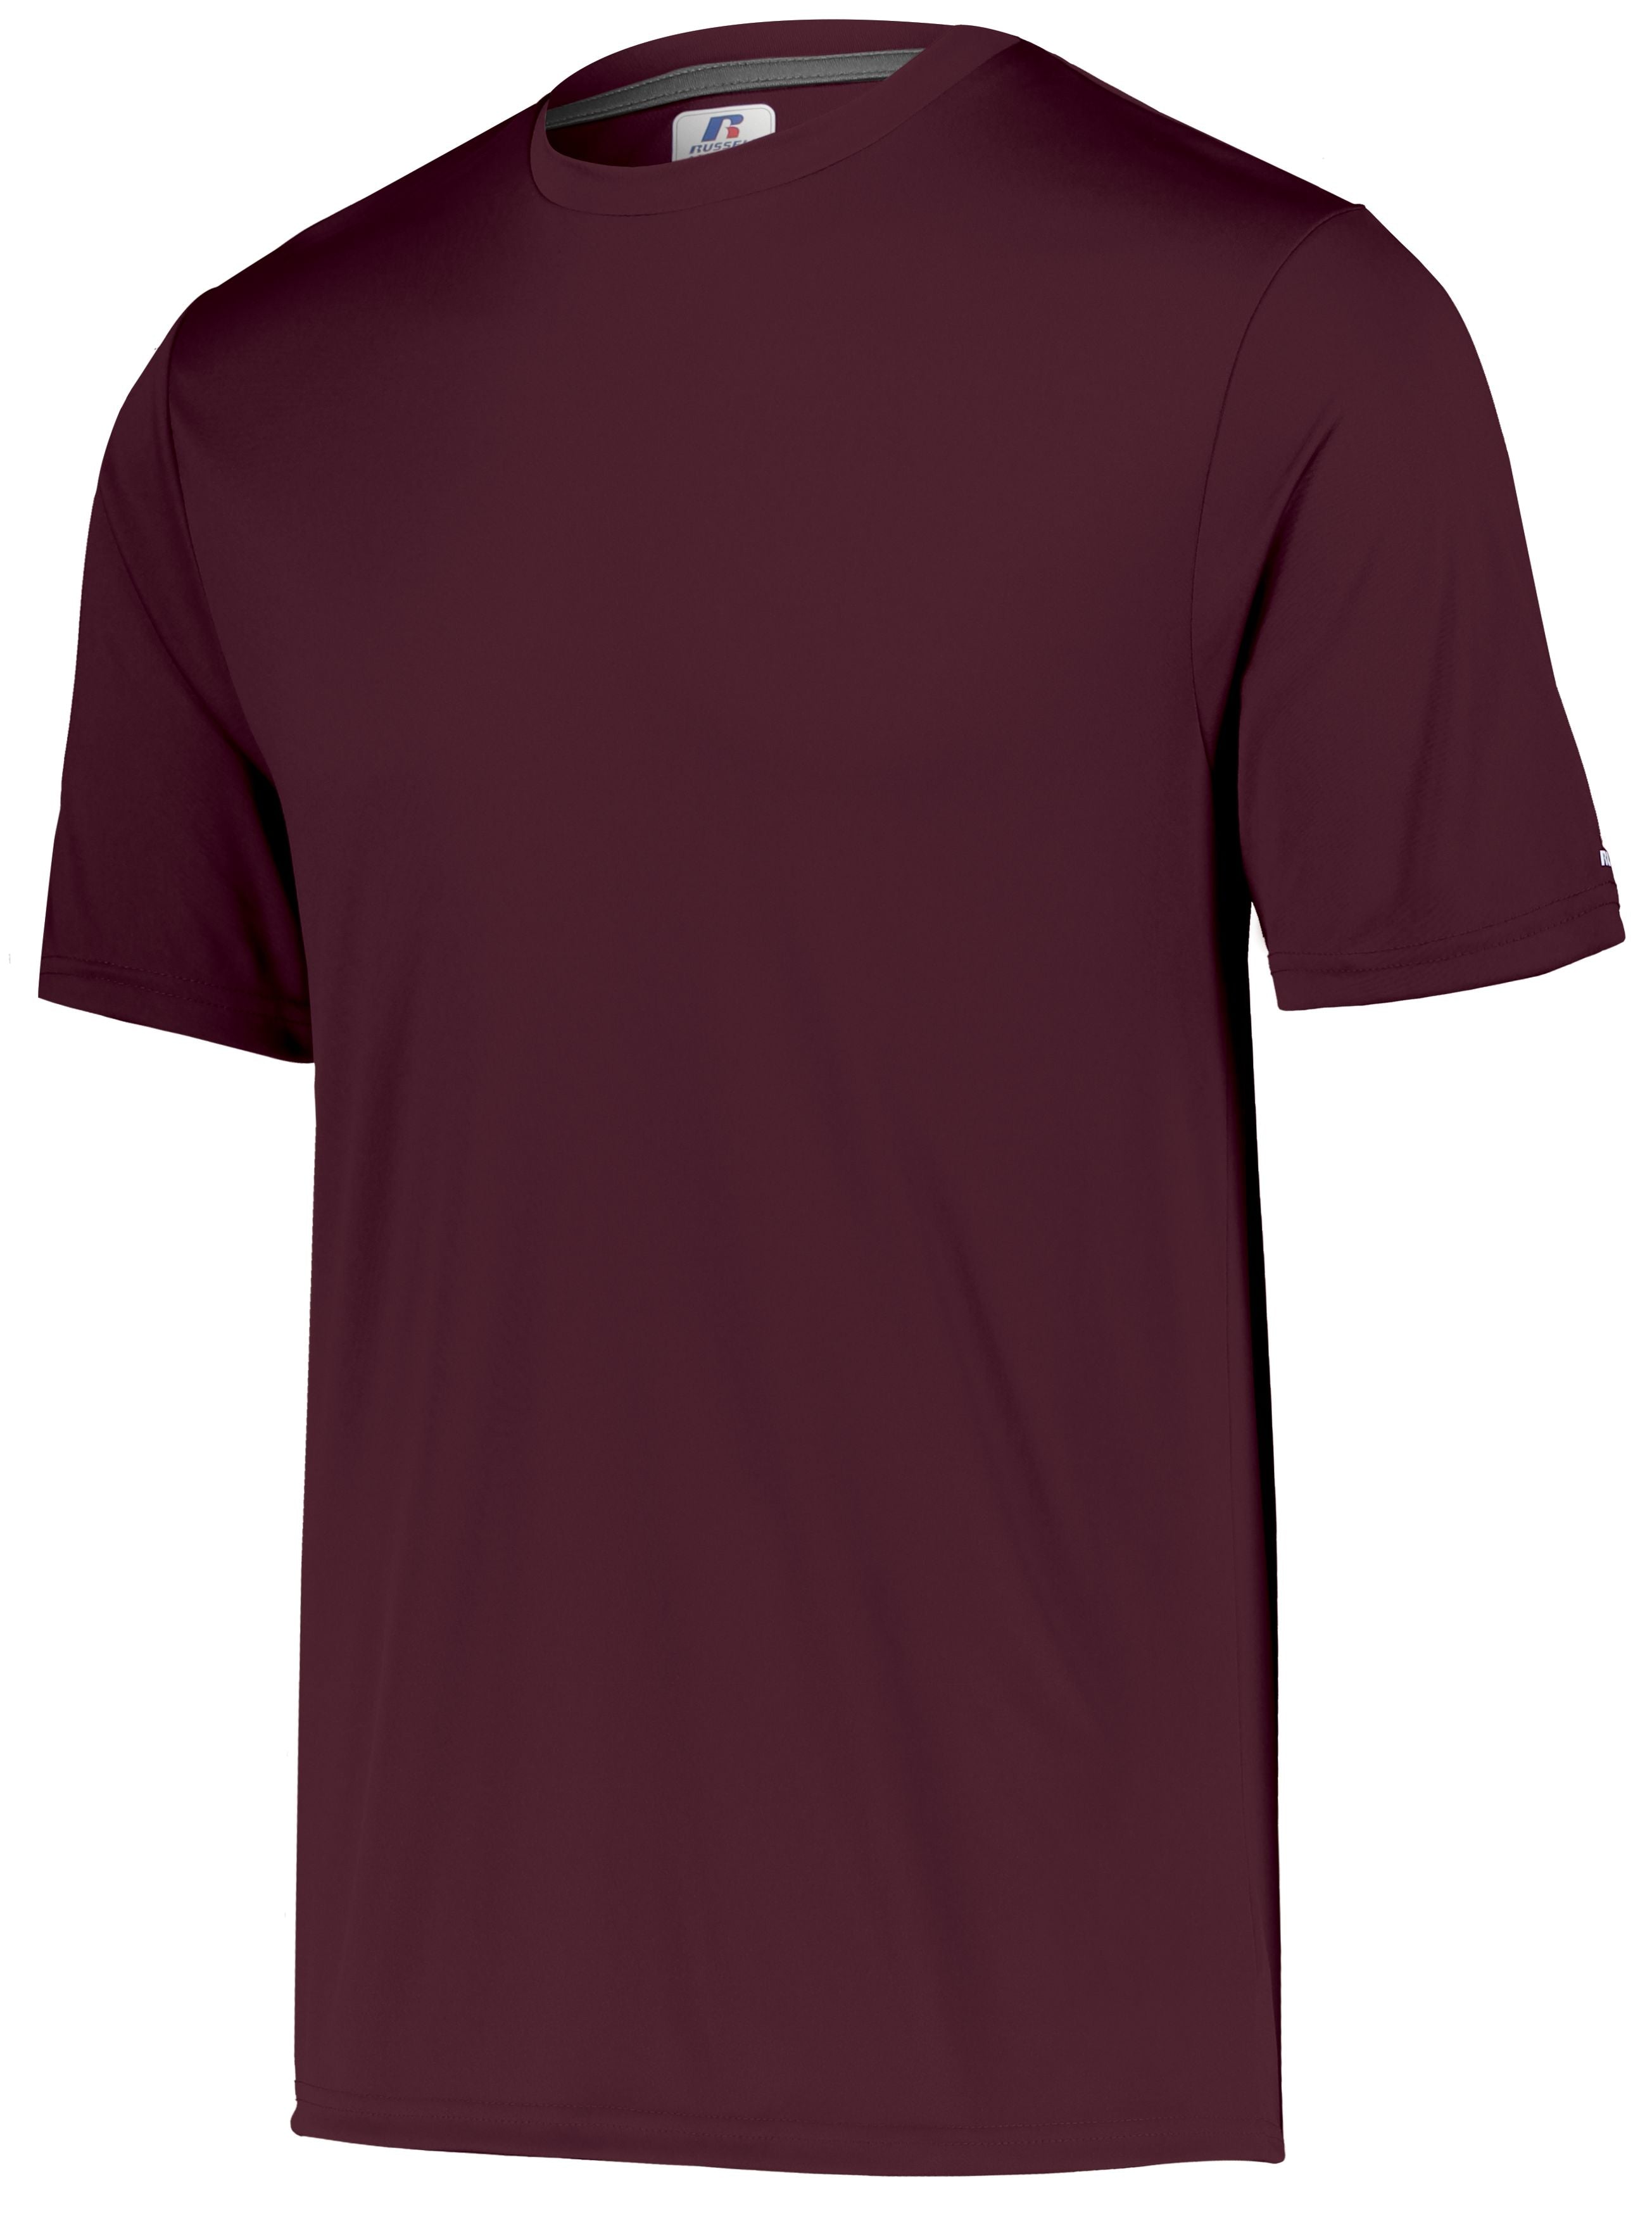 Russell Athletic Youth Dri-Power Core Performance Tee in Maroon  -Part of the Youth, Youth-Tee-Shirt, T-Shirts, Russell-Athletic-Products, Shirts product lines at KanaleyCreations.com